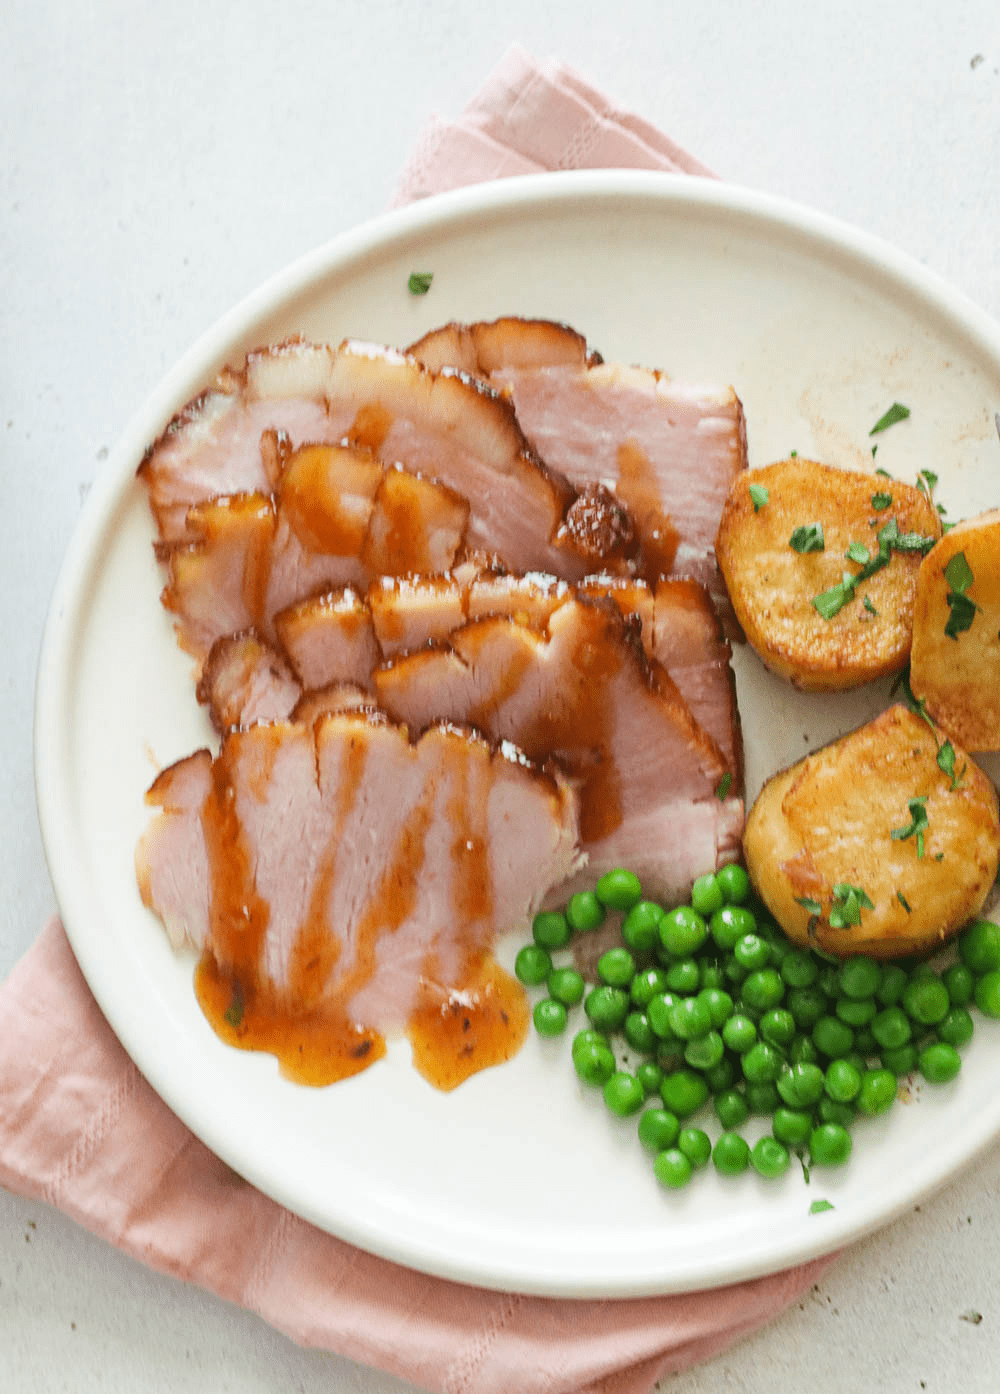 A plate of smoked ham slices drizzled with glaze and served with green peas and potatoes